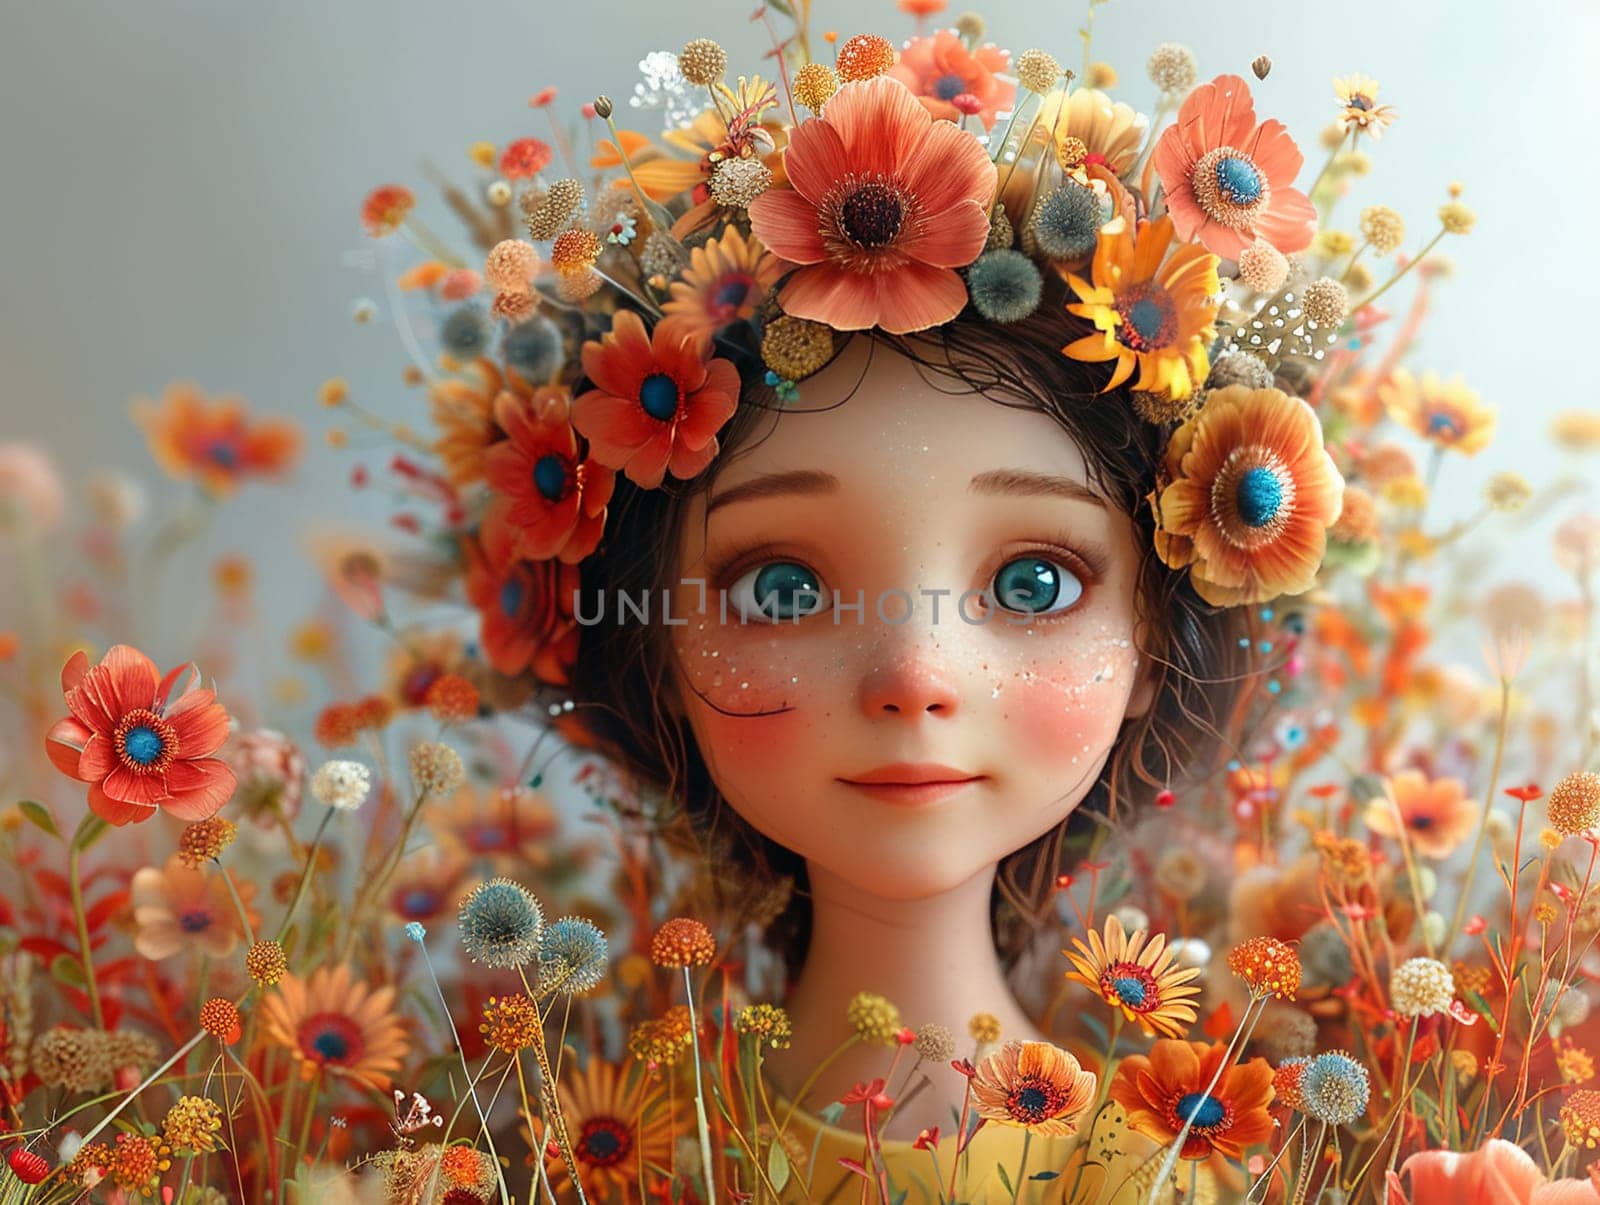 Flower-themed whimsical character designs, creative elements with personalities as vibrant as their floral inspirations.